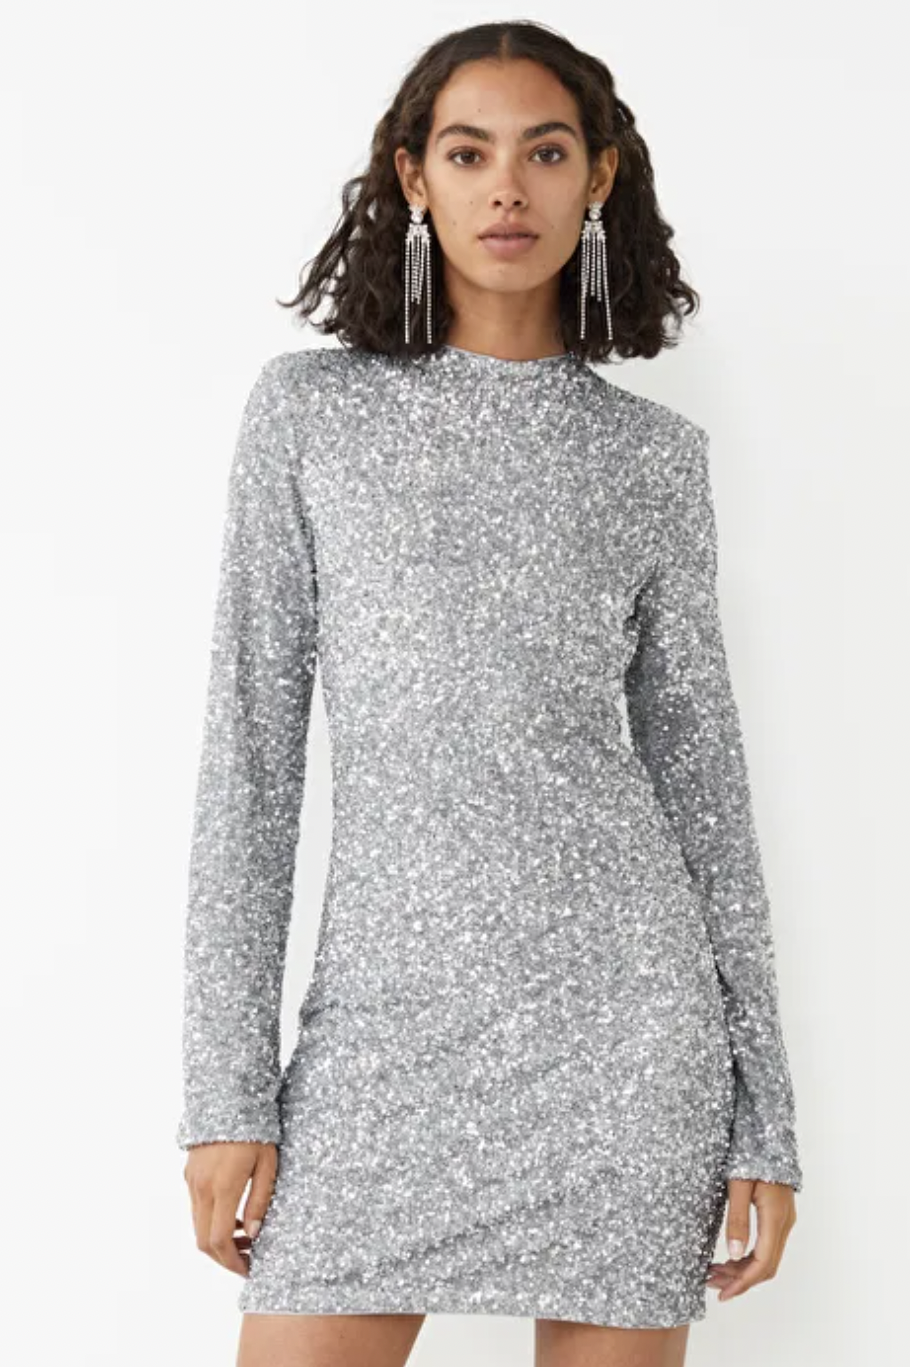 & Other Stories Fitted Sequin Mini Dress